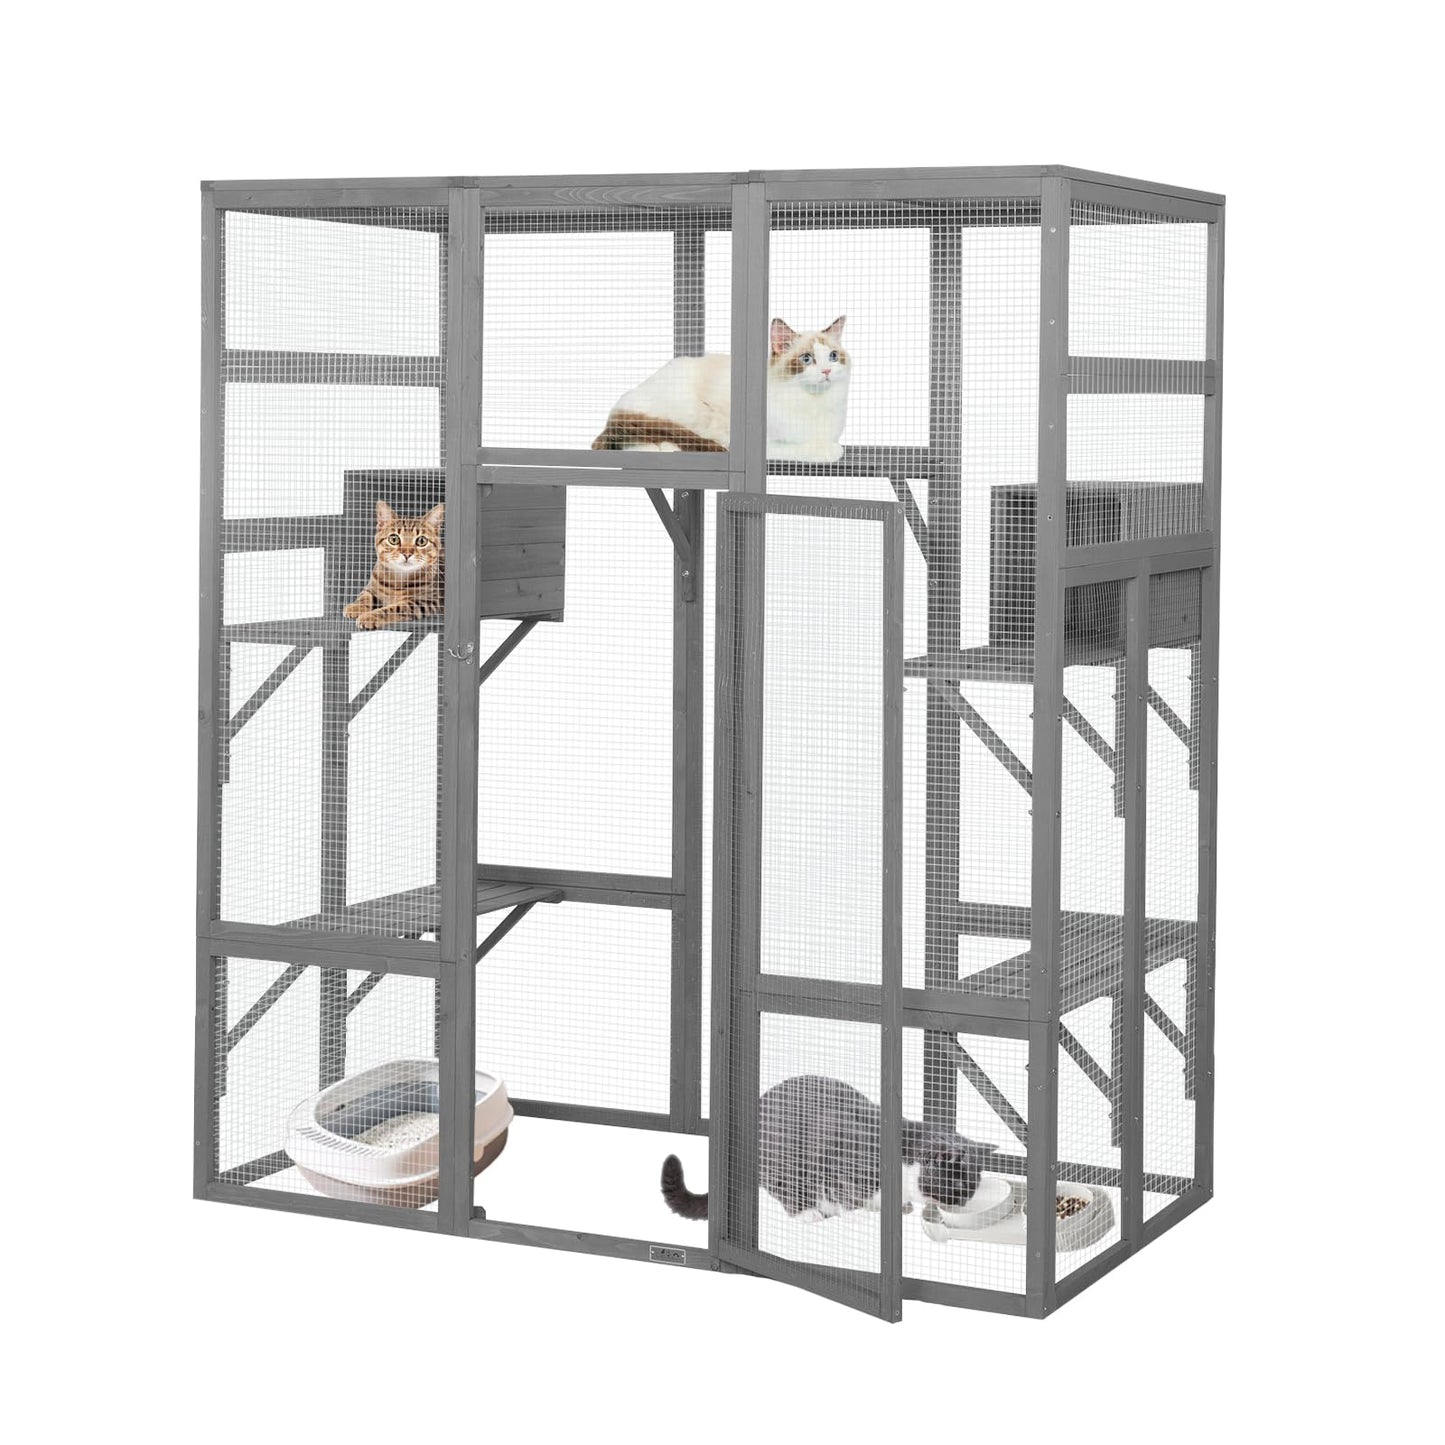 ISDAY Extra Large Outdoor Cat House Wooden Cat Cage Waterproof Roof Catio Outdoor Cat Enclosure - Cat Play & Run Enclosures Cat Playpen Window Cats Crate with 7 Platform and 2 Resting Box (Gray)